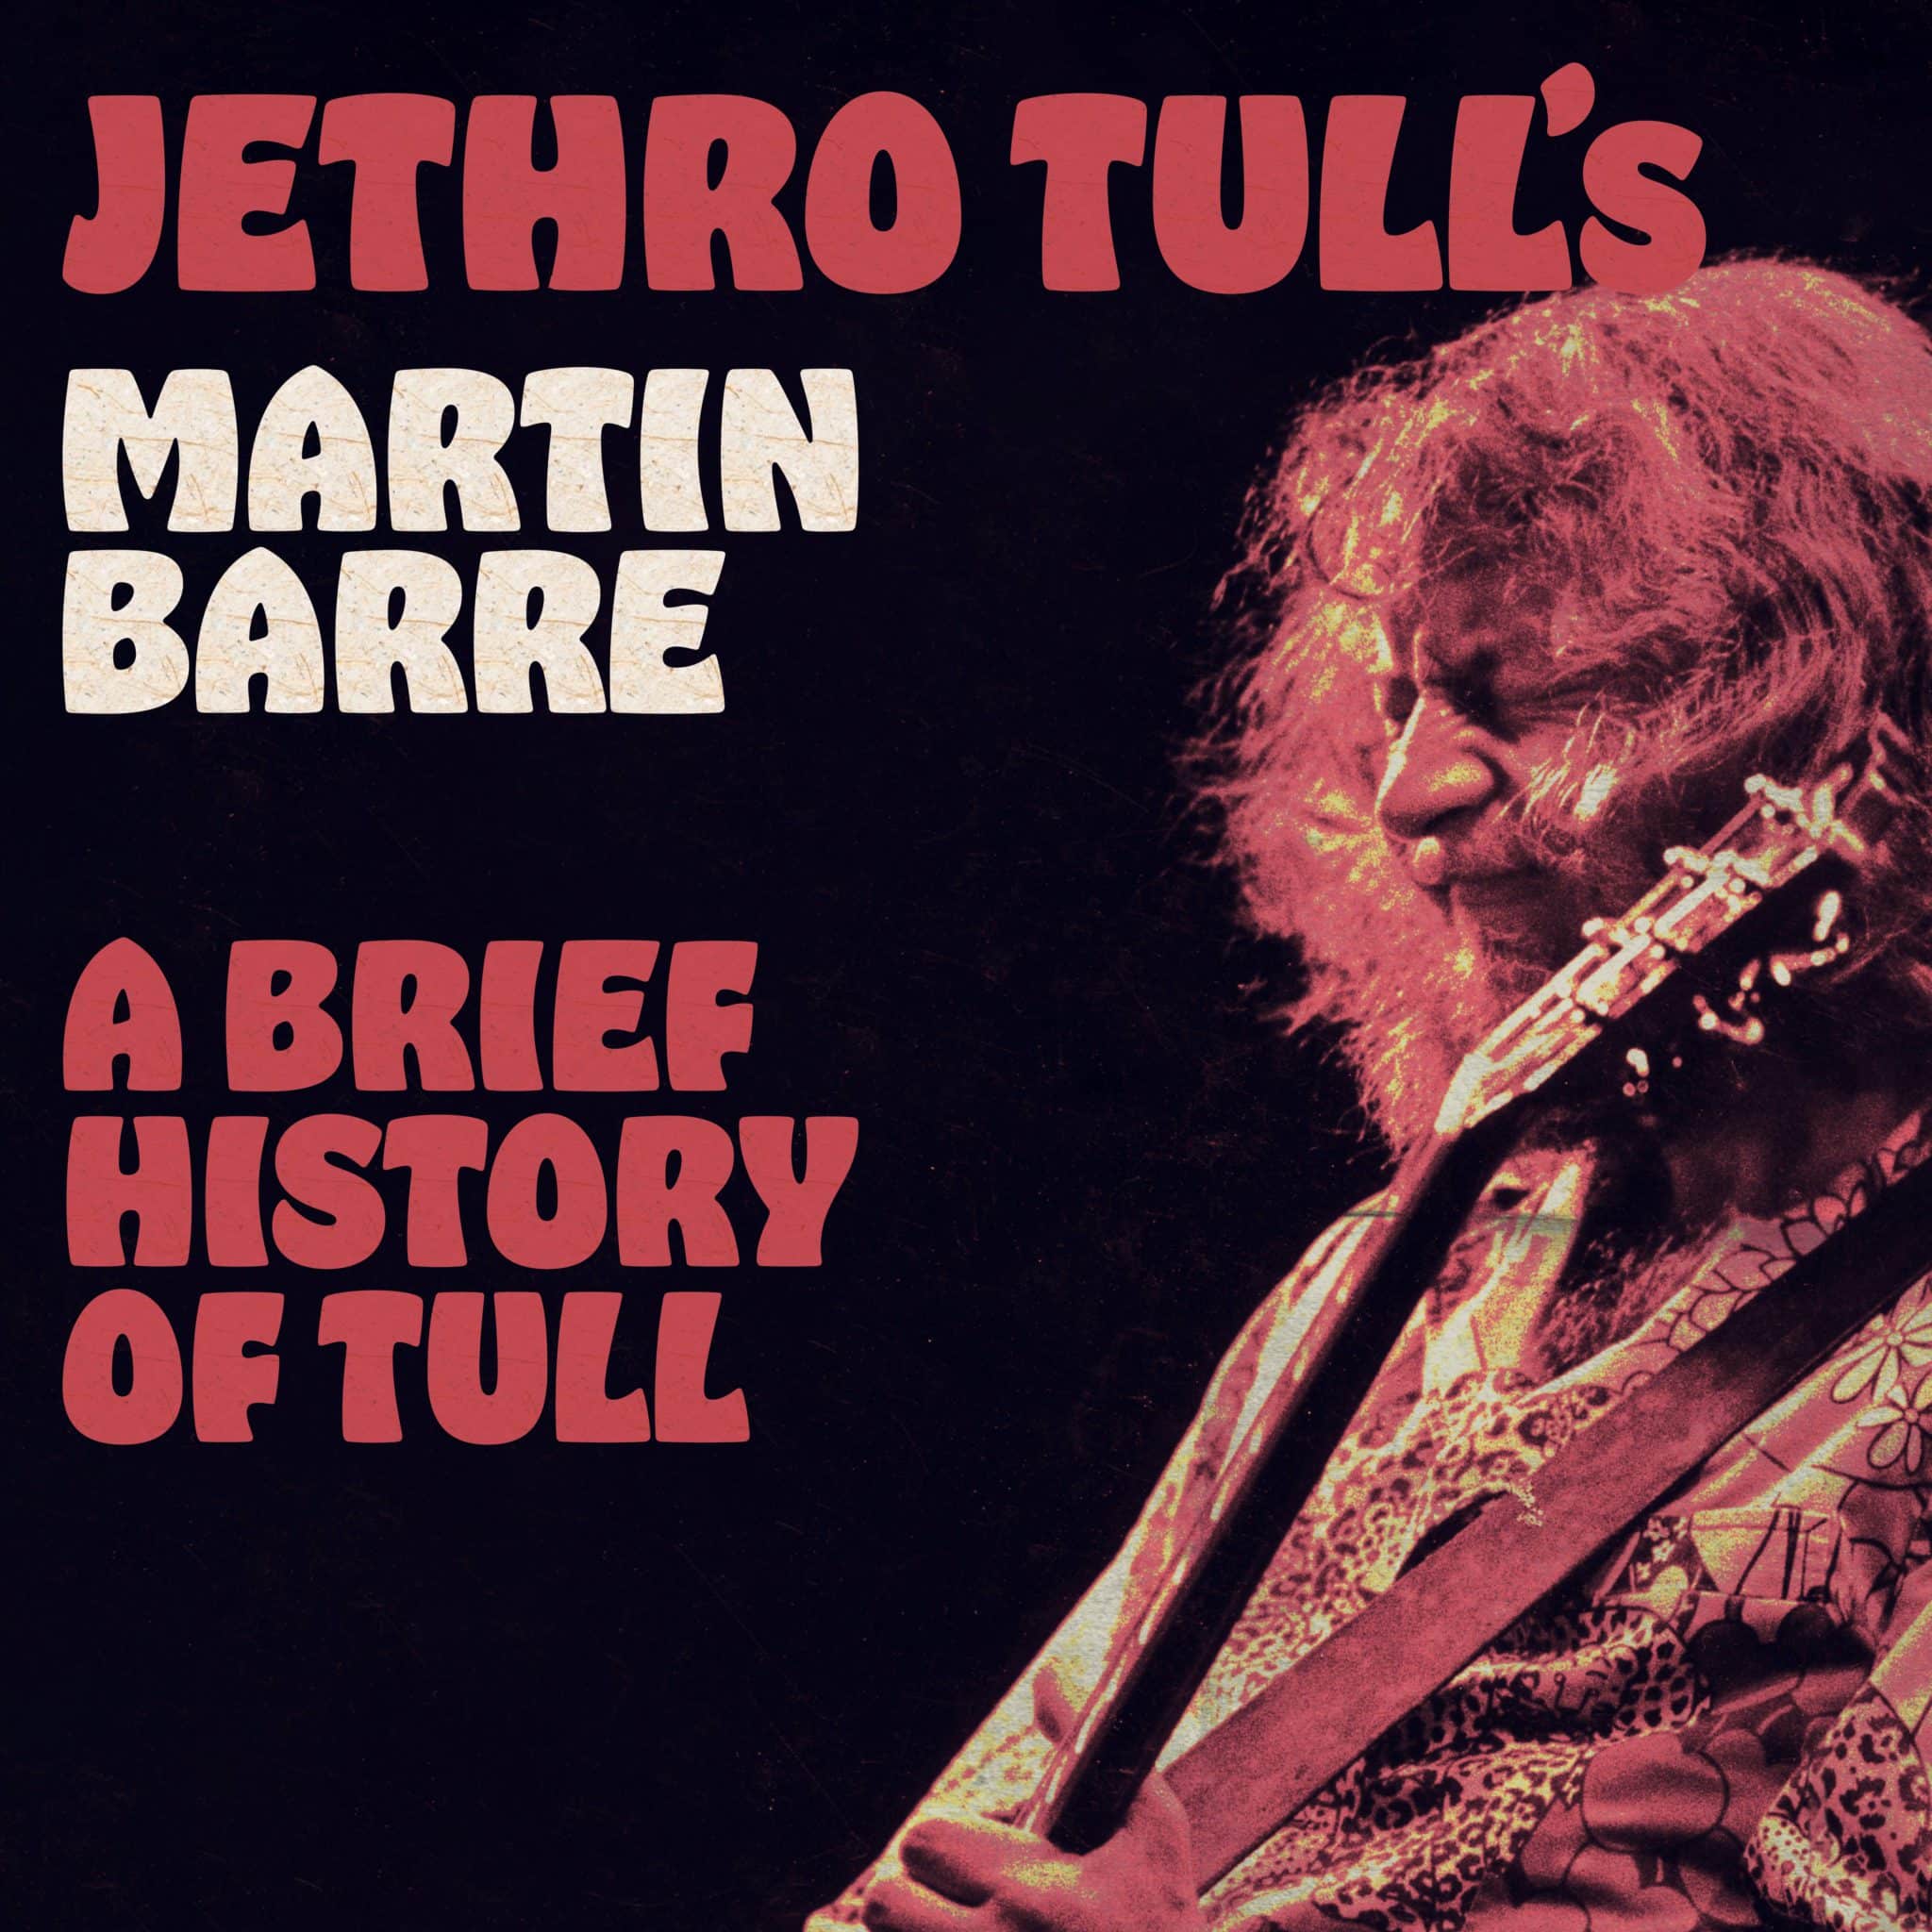 JETHRO TULL         This was